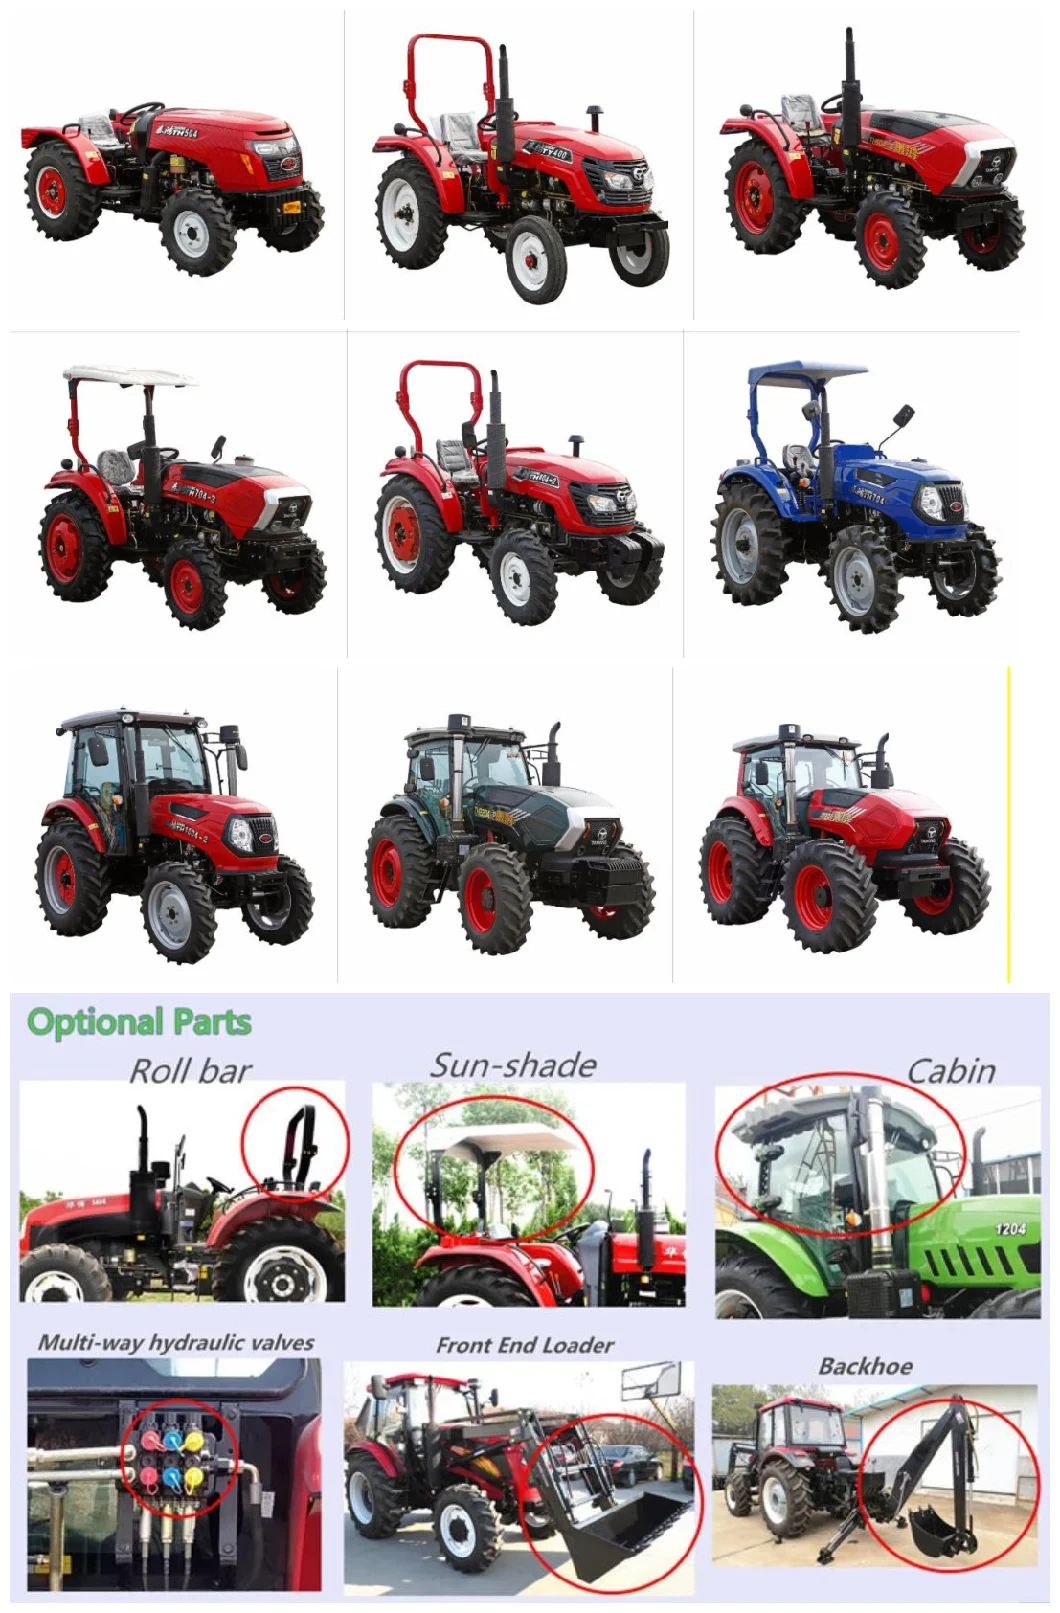 Taihong Old Brand 140HP 4WD Agricultural Tractor Farm Walking Tractors